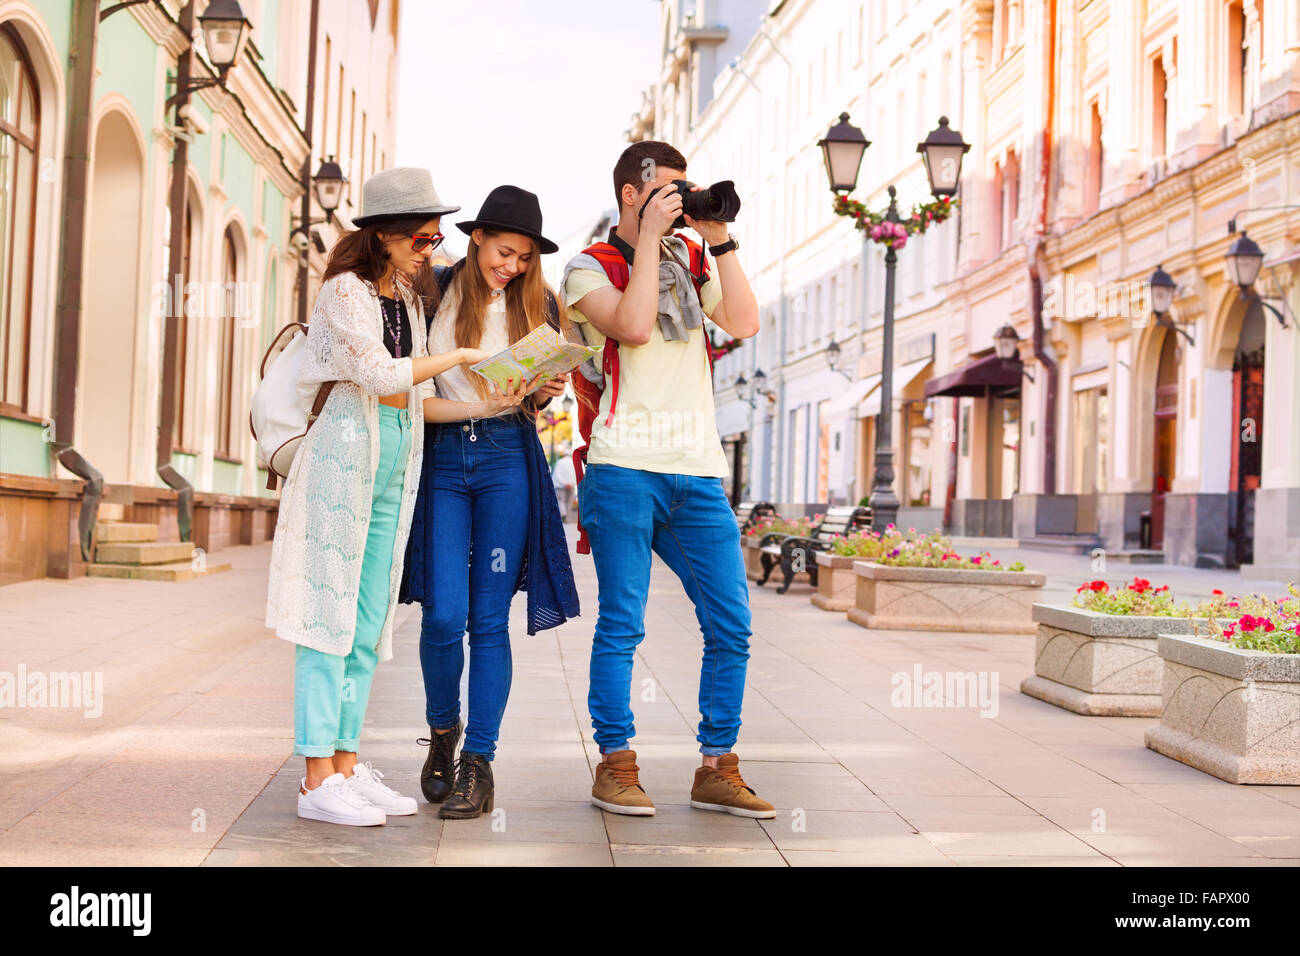 Two girls hold city map and guy with camera Stock Photo